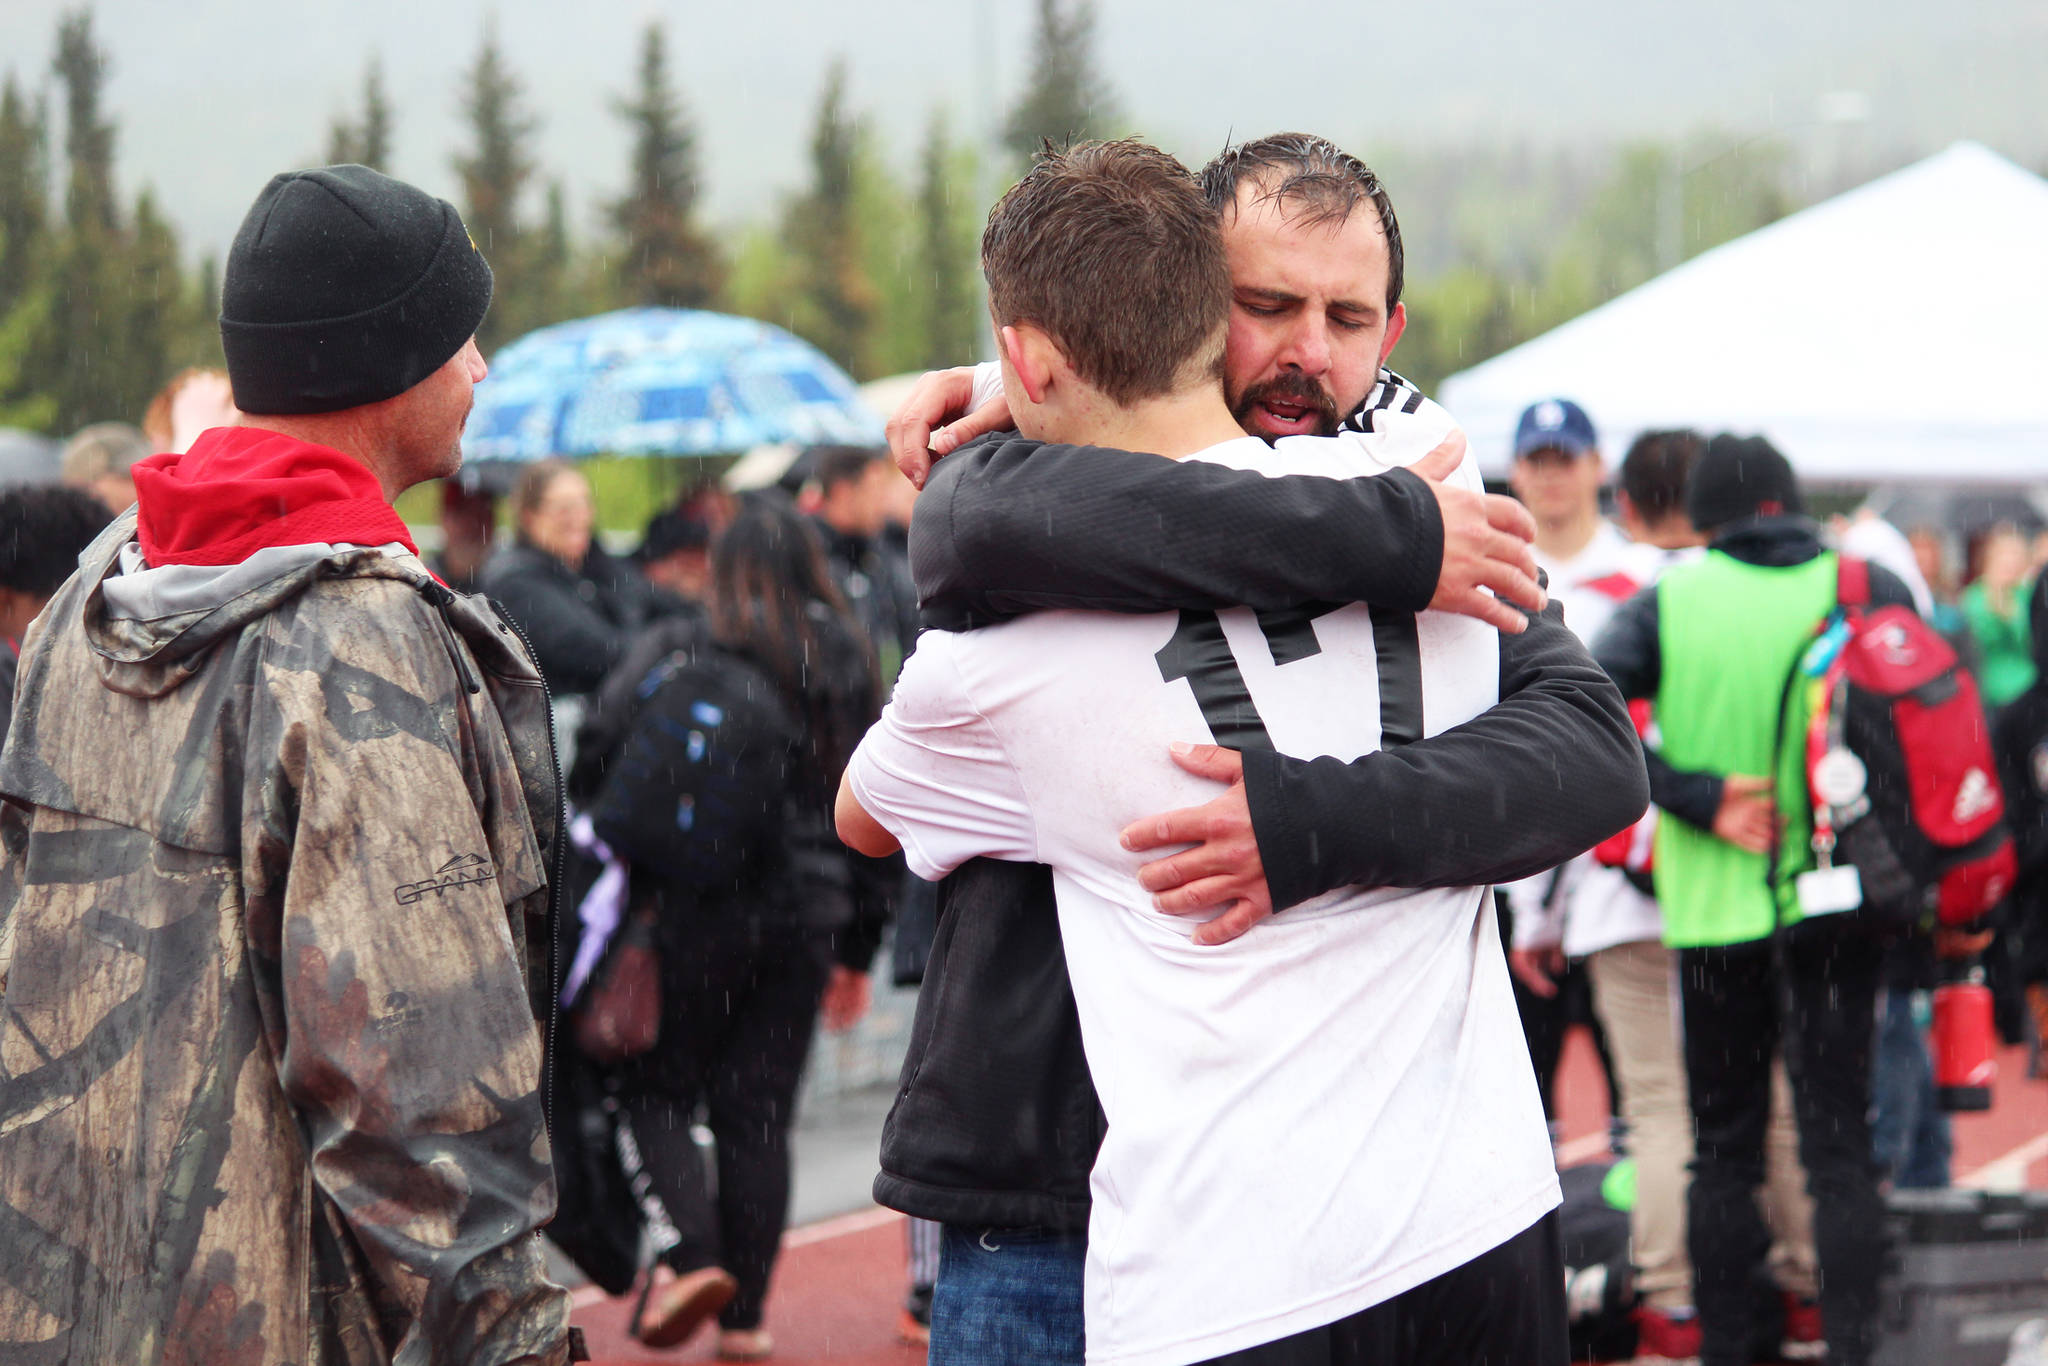 Kenai boys soccer team head coach Shane Lopez hugs player Travis Verkuilen as they celebrate their win over Juneau in the Saturday, May 25, 2019 final game of the Division II state soccer championships at Service High School in Anchorage, Alaska. (Photo by Megan Pacer/Homer News)